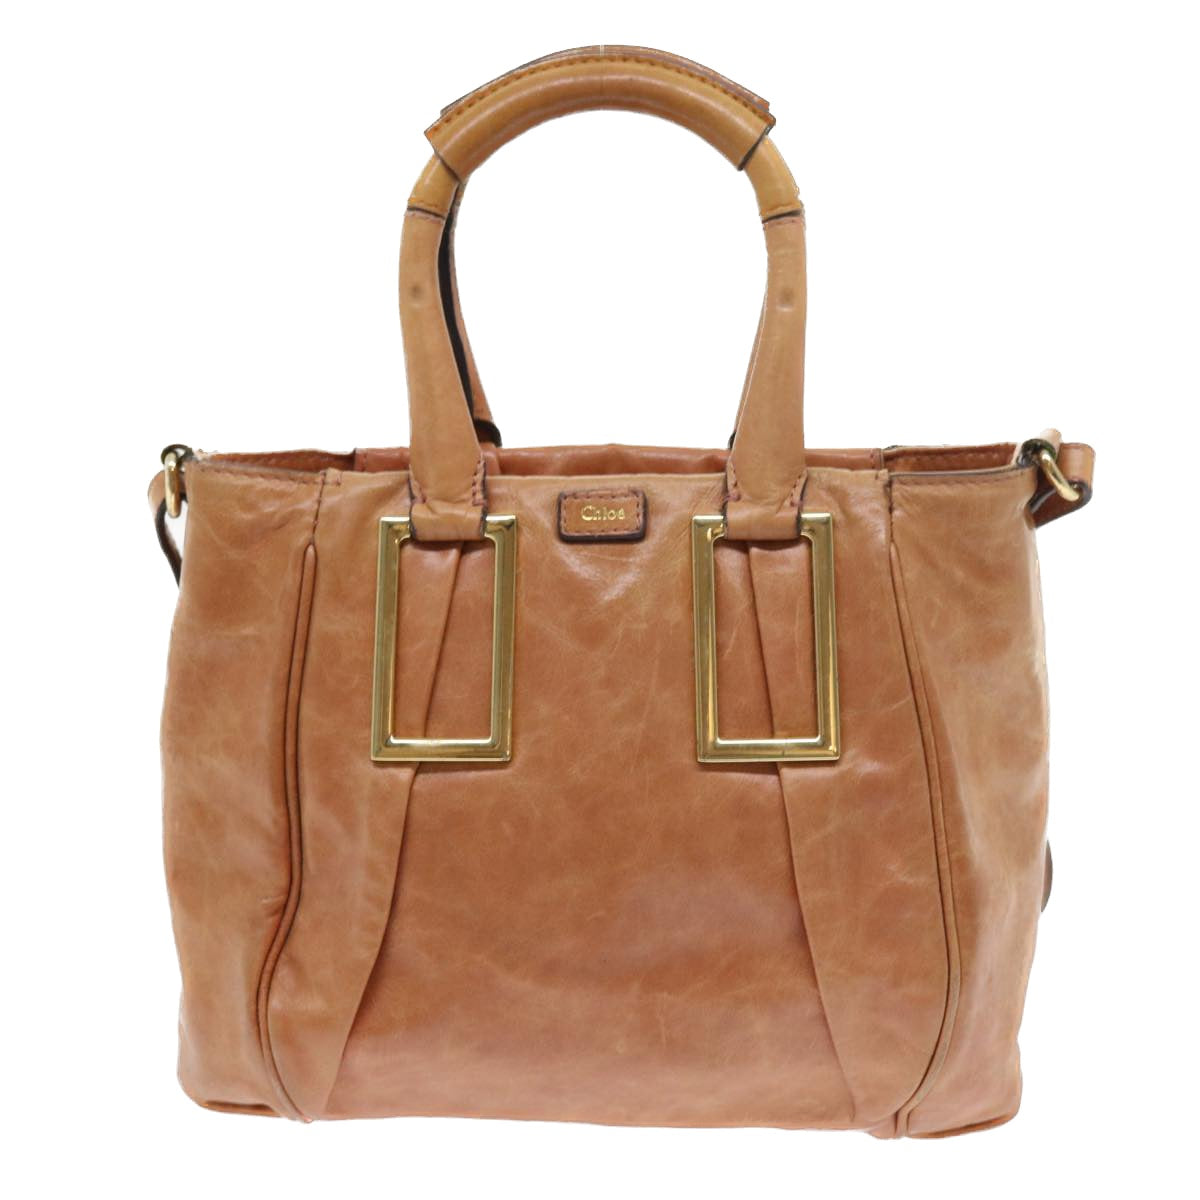 Chloe Etel Hand Bag Leather 2way Brown Auth bs8592 - 0